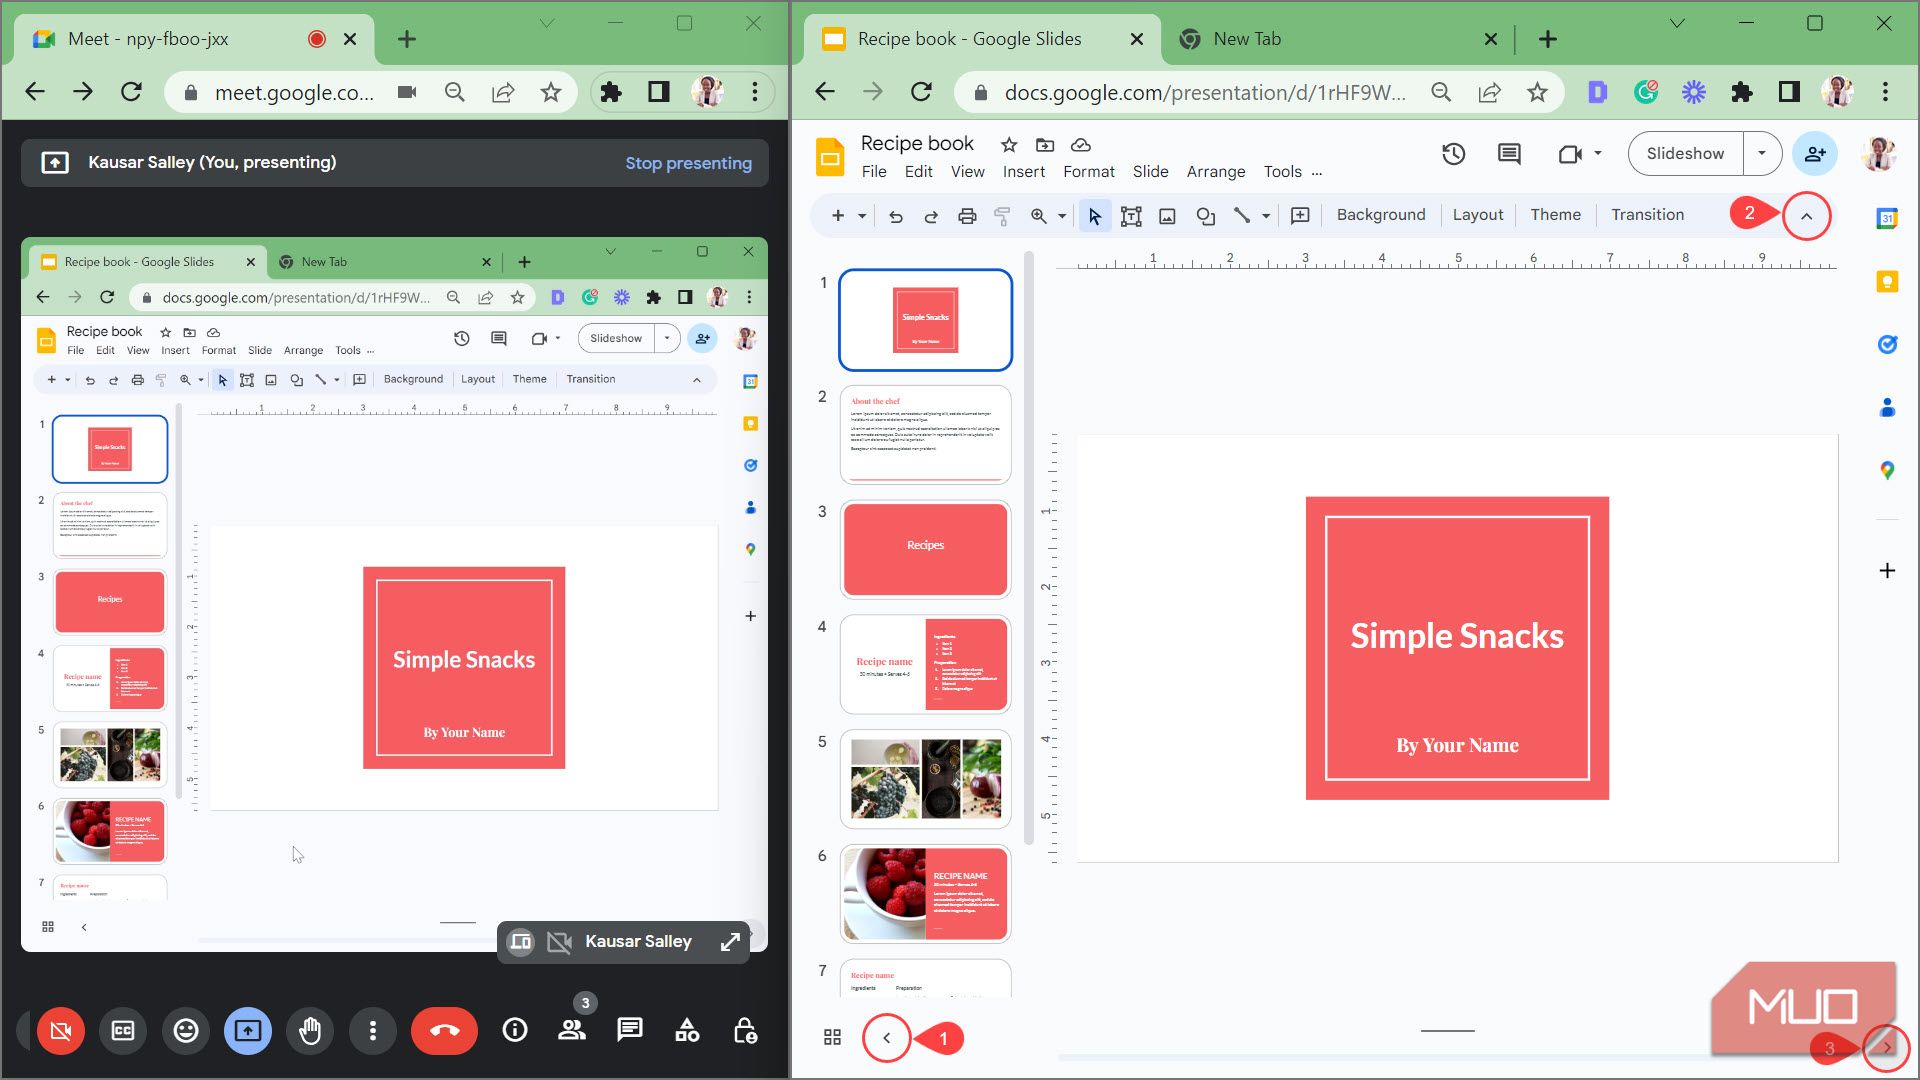 Use Window mode to view Google Slides and Google Meet participants